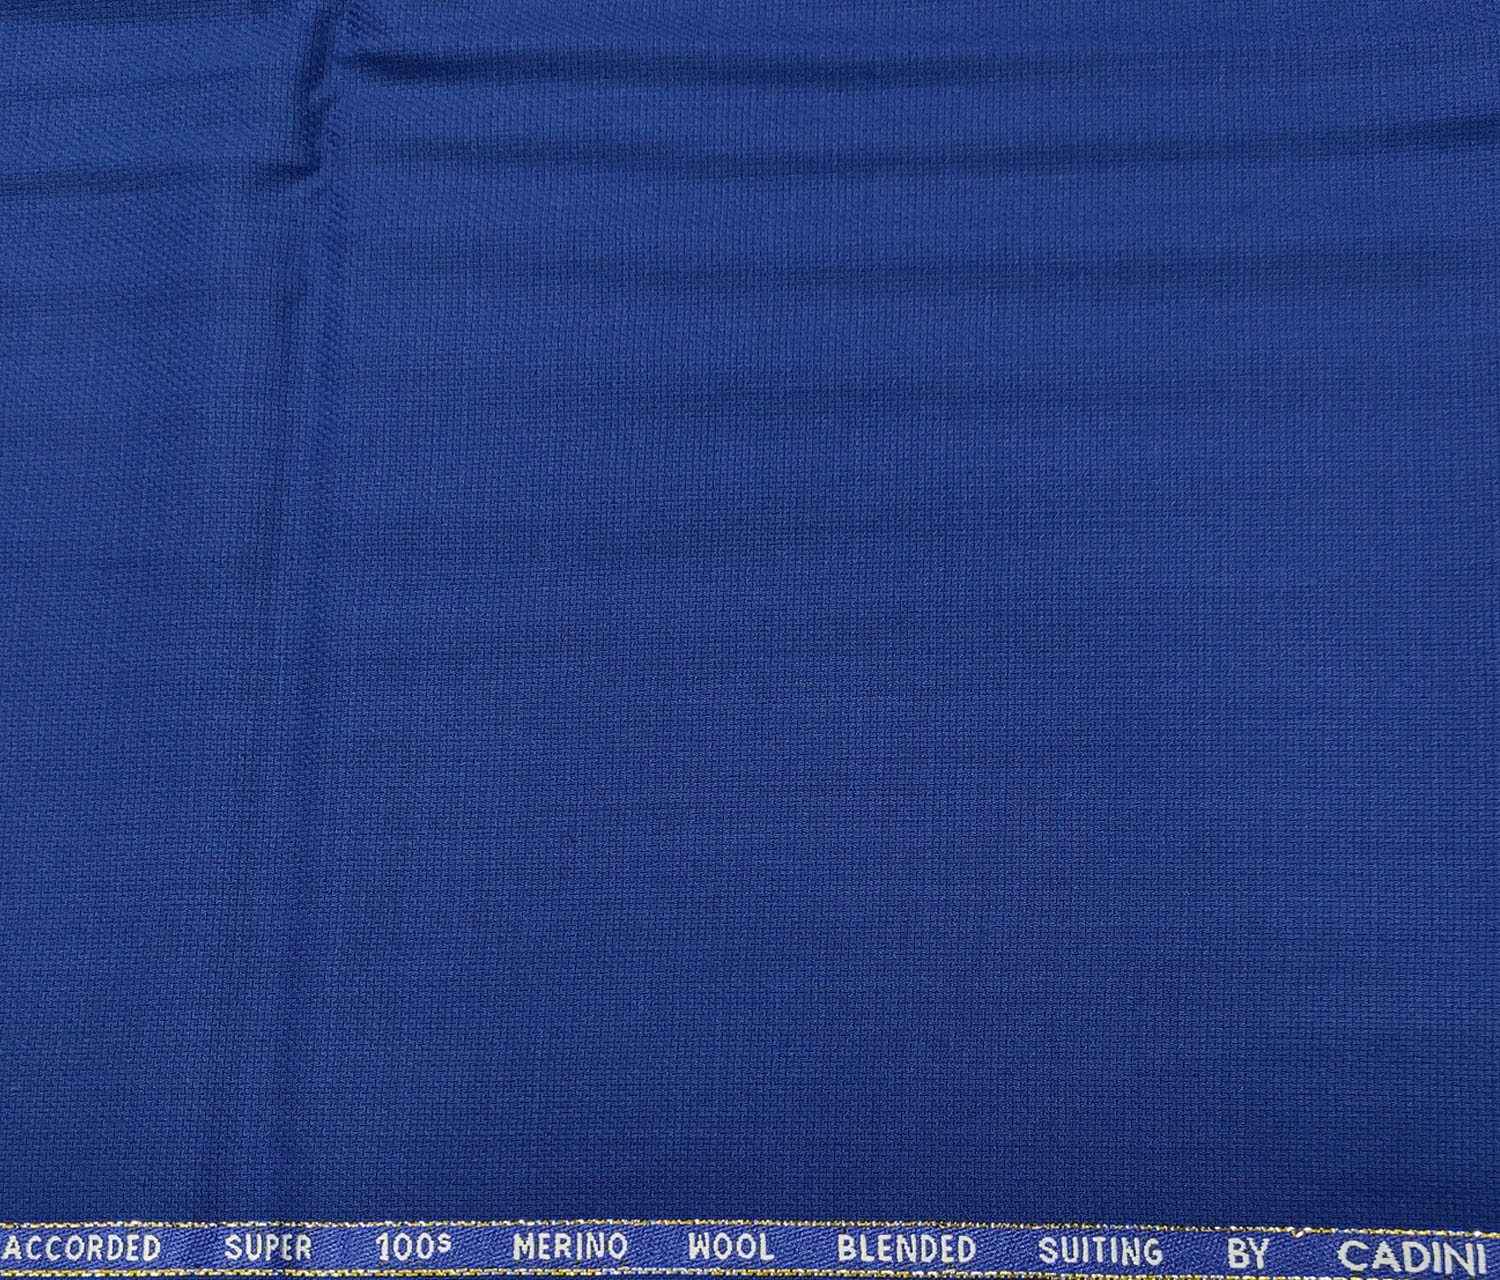 Cadini Italy Men's Wool Structured  Super 100's Unstitched Trouser or Modi Jacket Fabric (Royal Blue